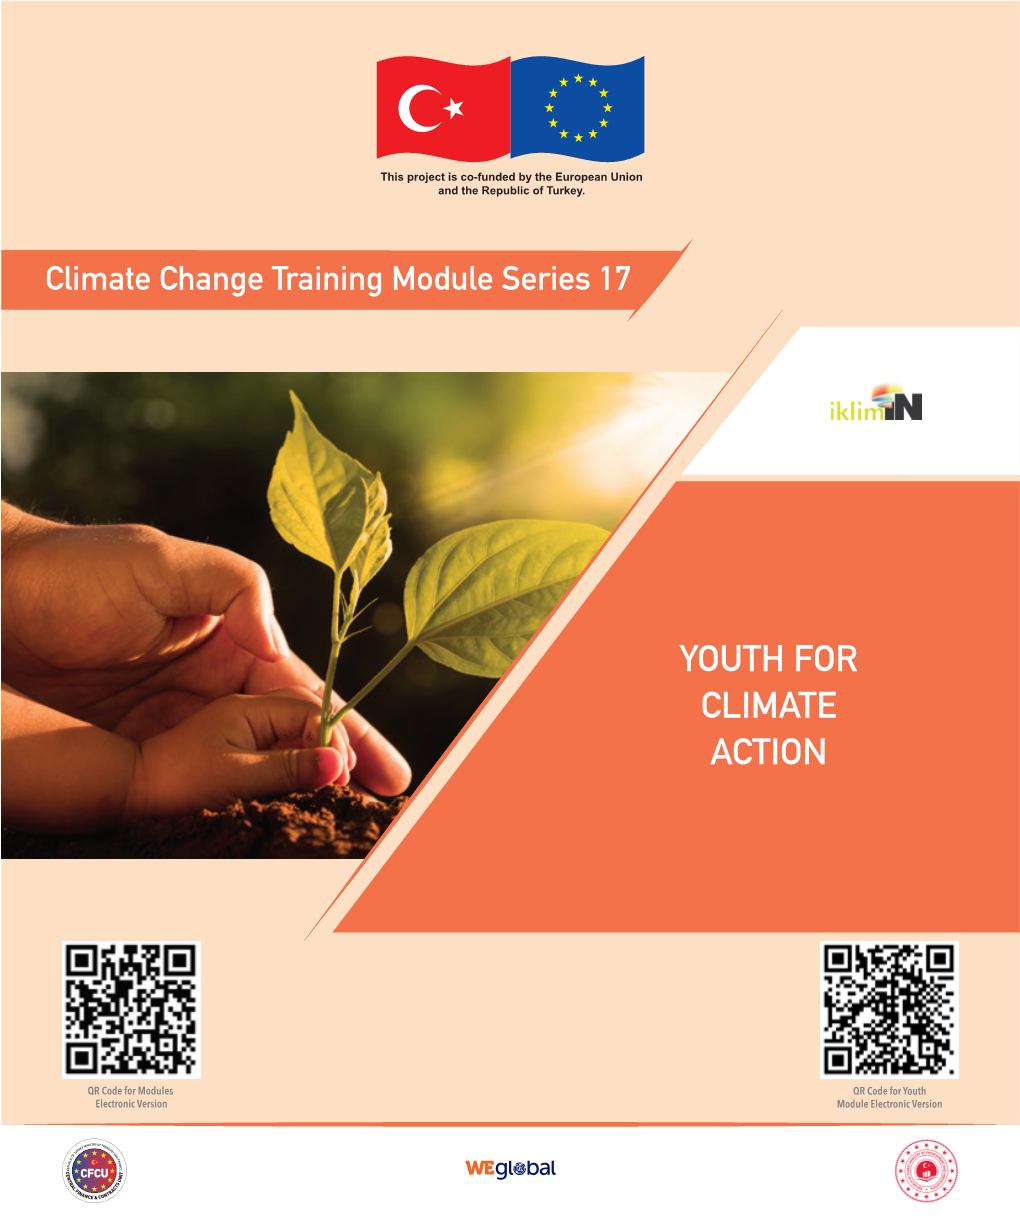 Youth for Climate Action